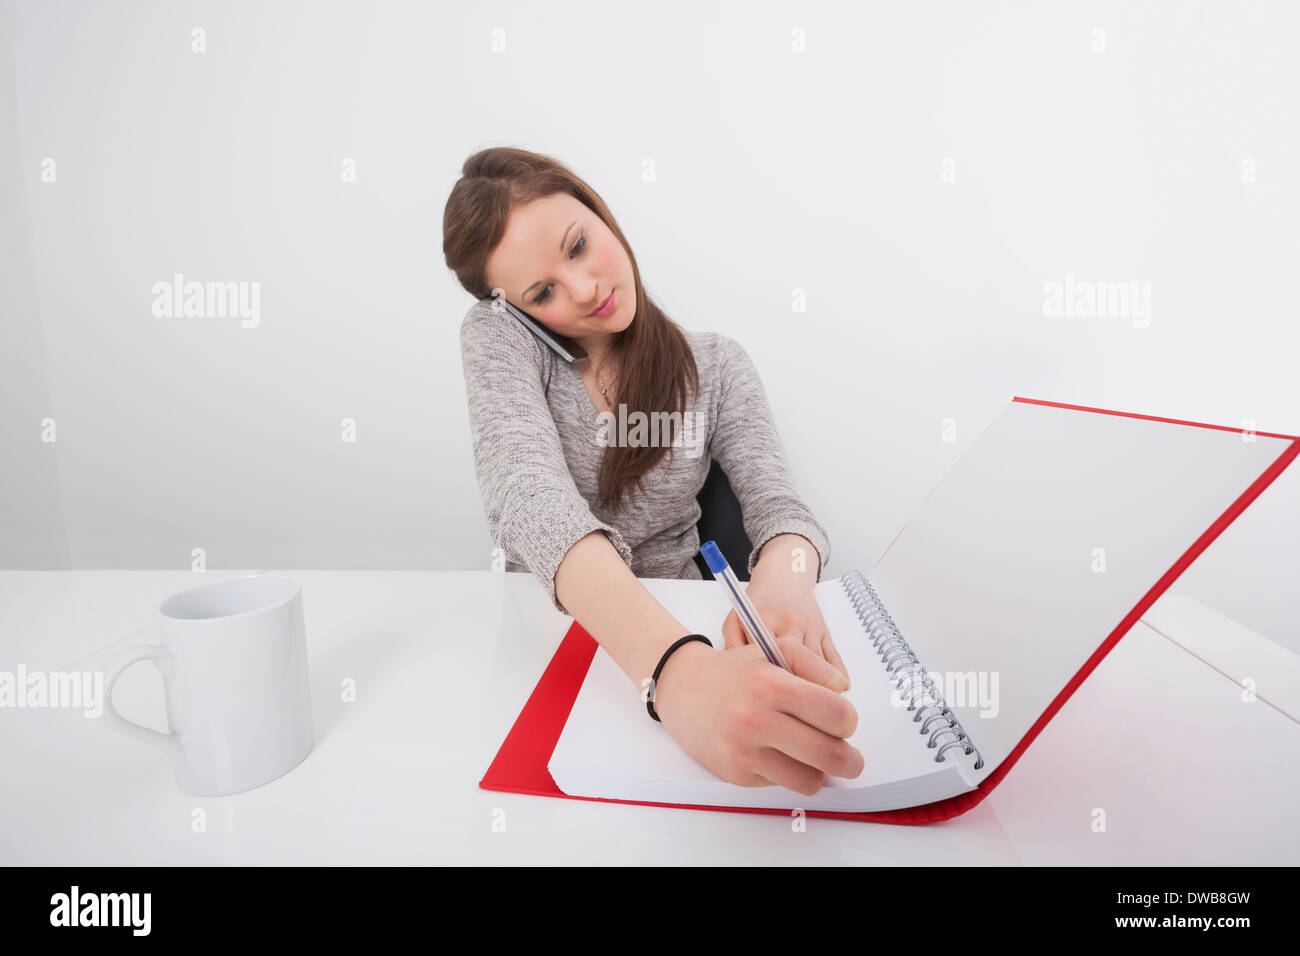 Businesswoman writing notes while answering smart phone in office Stock Photo